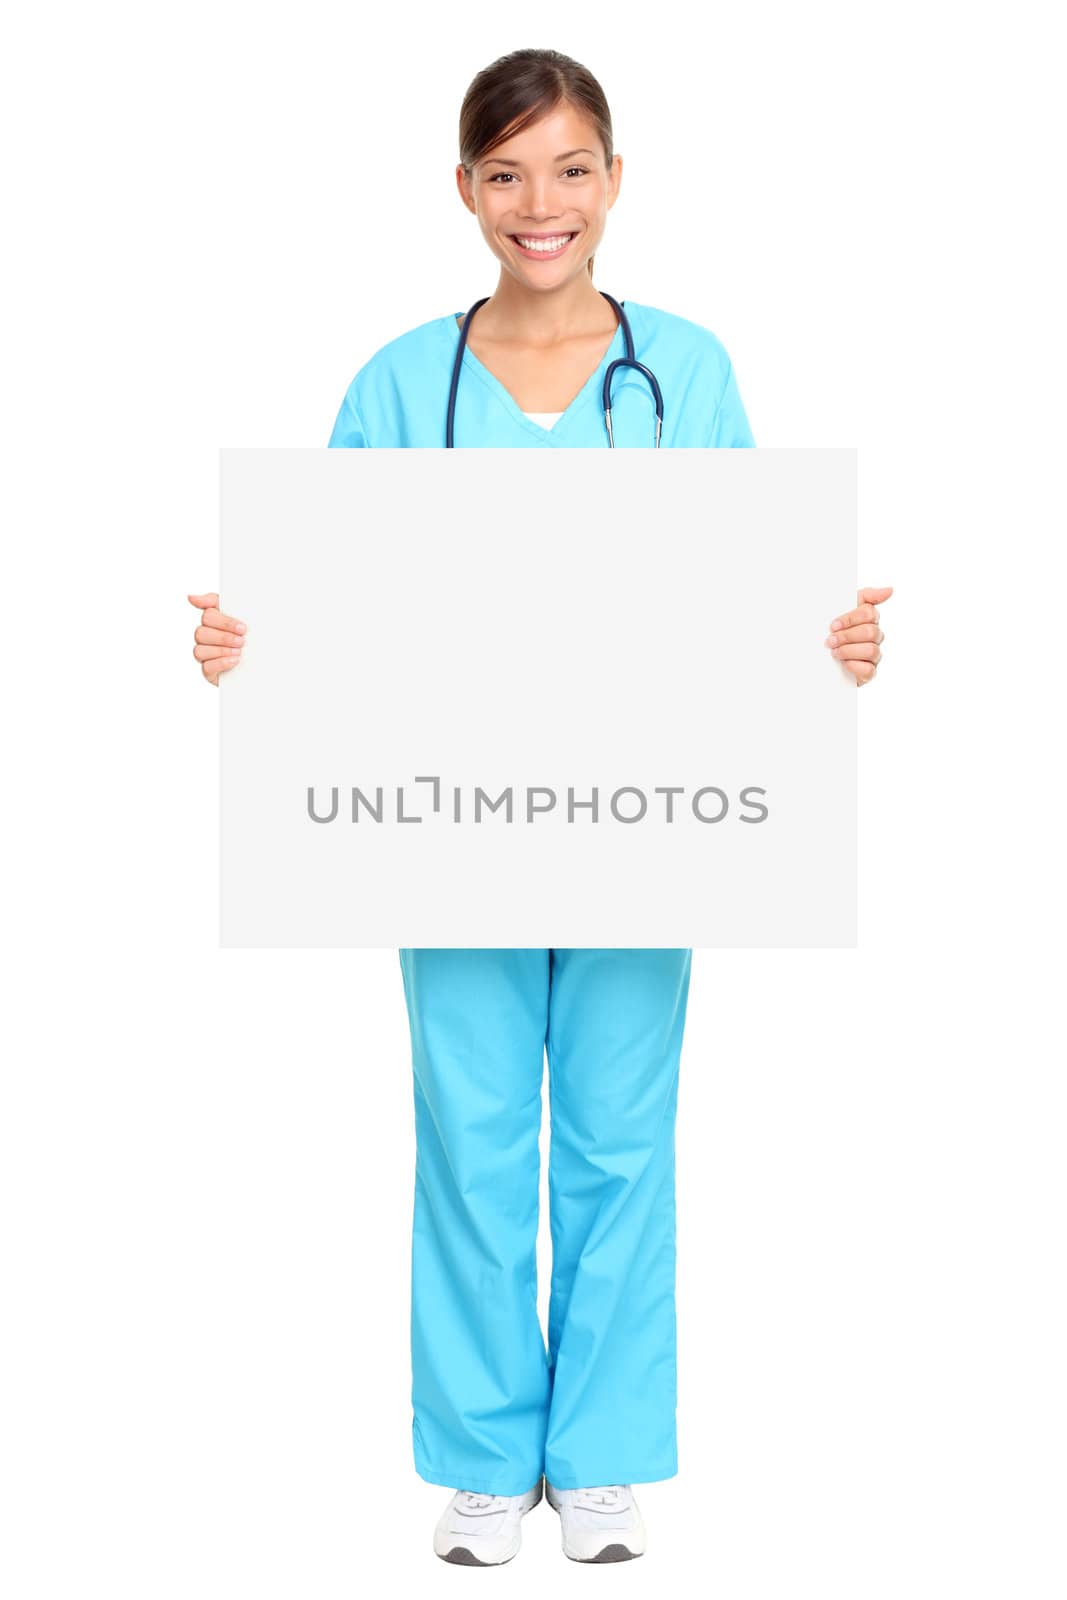 Nurse showing medical sign billboard standing in full length. Young smiling nurse or doctor in scrubs showing empty blank sign board with copy space. Asian Caucasian female model isolated on white background.